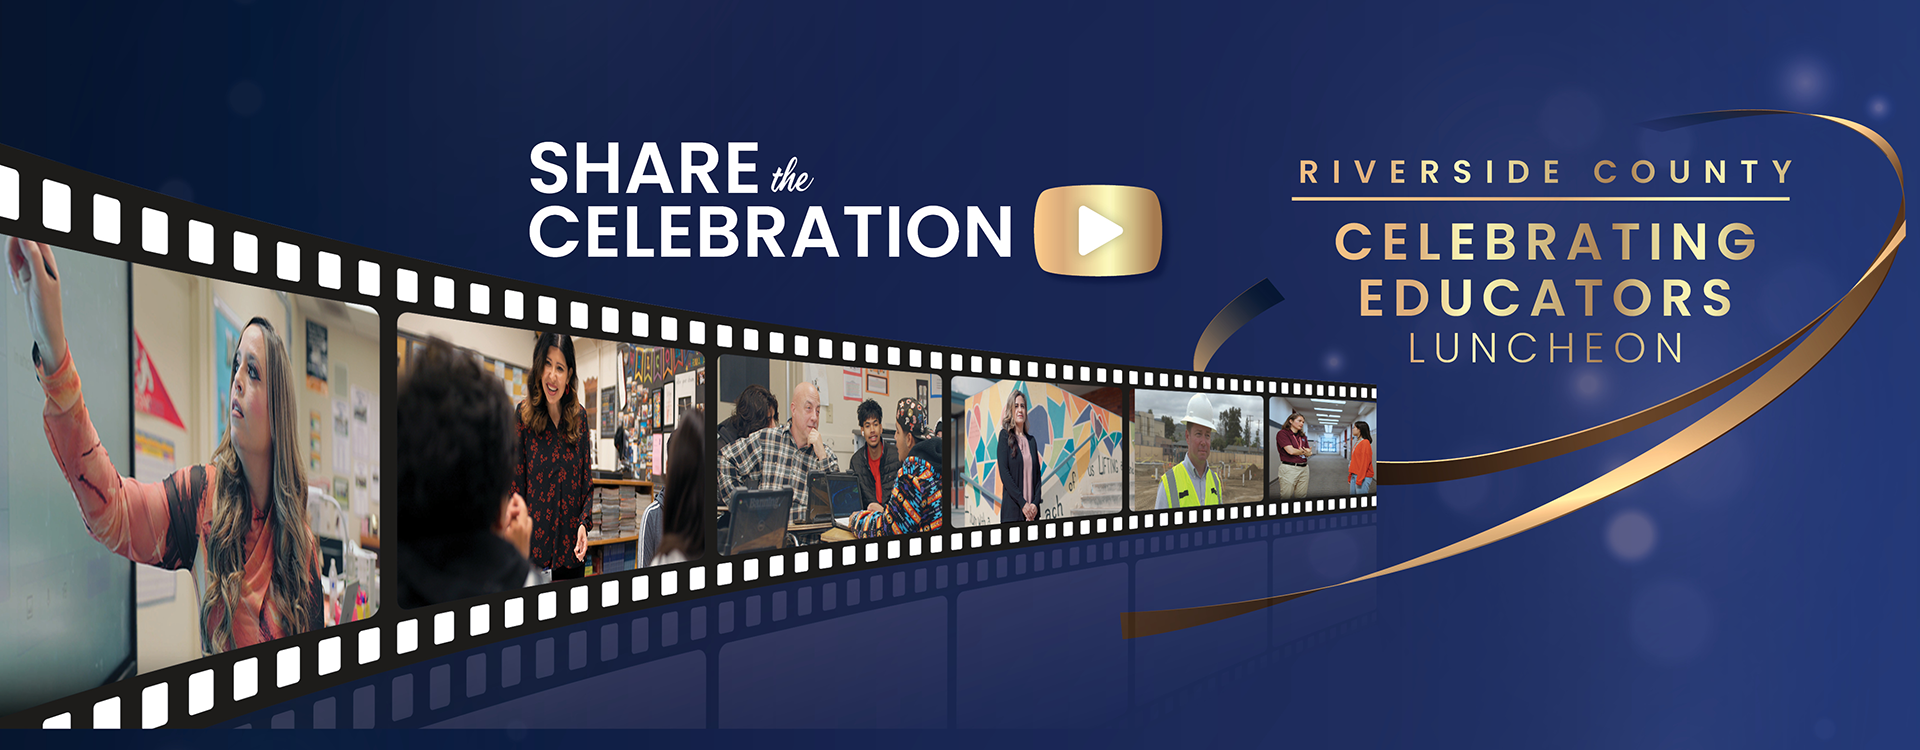 Share the Celebration. Riverside County Celebrating Educators Luncheon. Film reel with clips from honoree videos